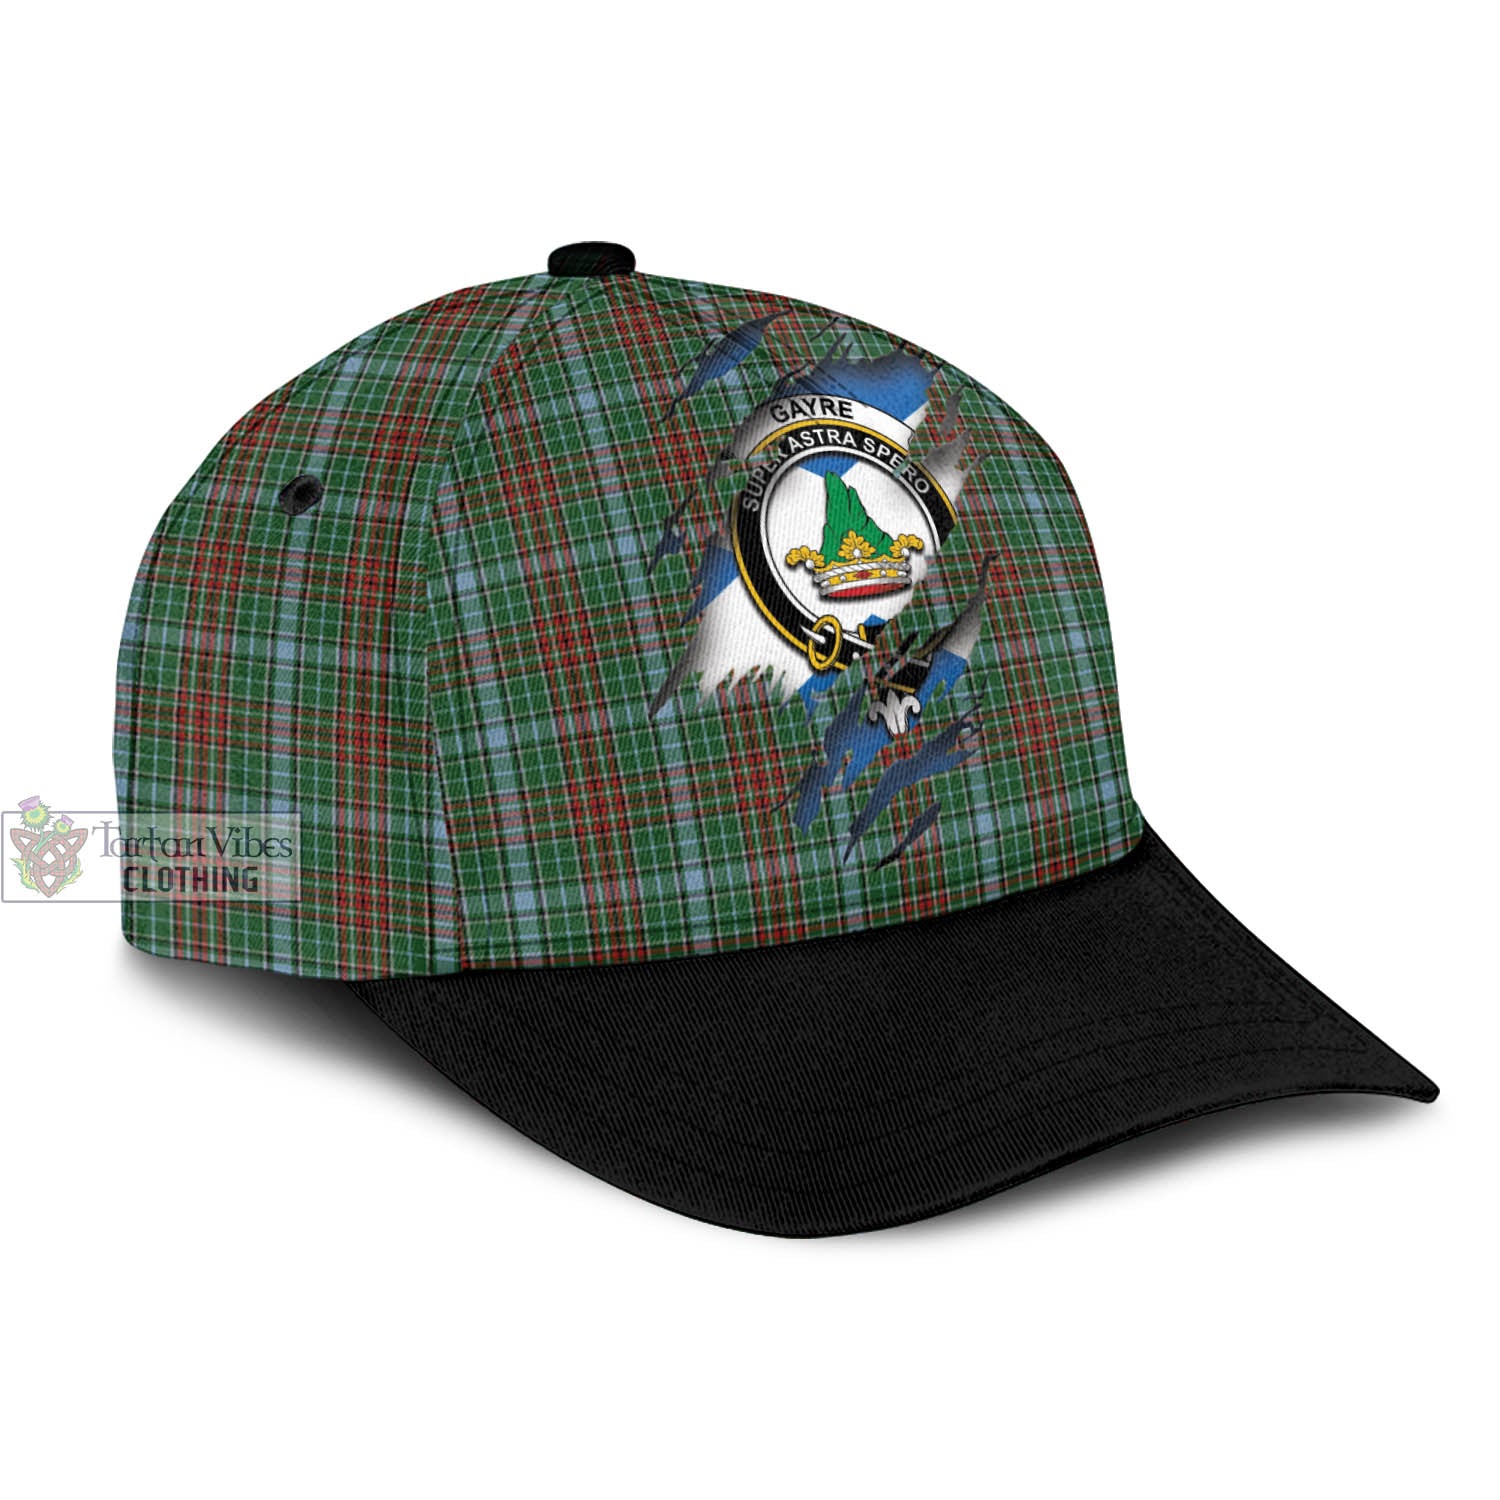 Tartan Vibes Clothing Gayre Tartan Classic Cap with Family Crest In Me Style